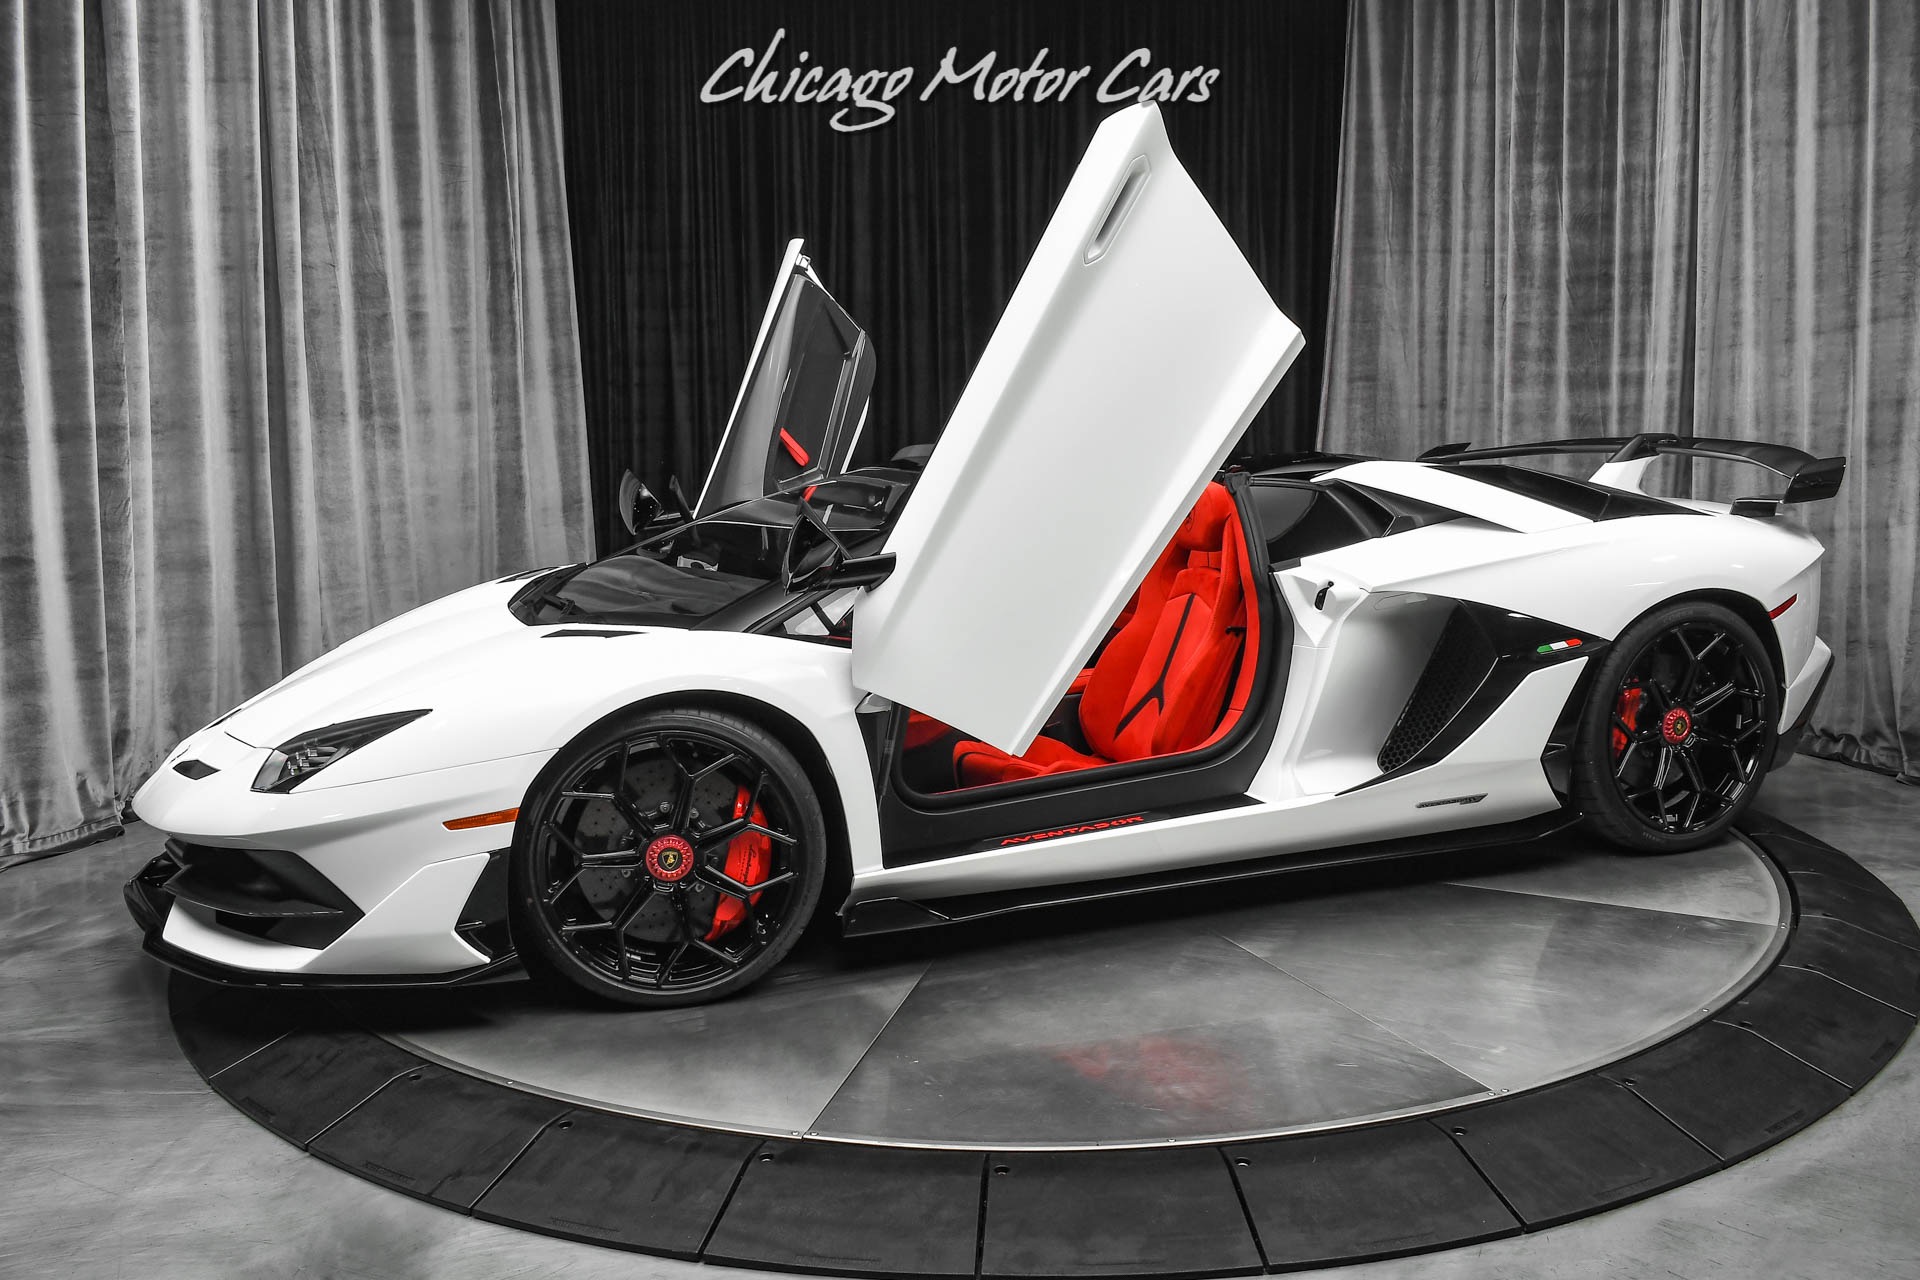 Used 2021 Lamborghini Aventador SVJ Roadster RARE! AD PERSONAM INTERIOR &  EXTERIOR! ONLY 300 MILES! LOADED! For Sale (Special Pricing) | Chicago  Motor Cars Stock #18459